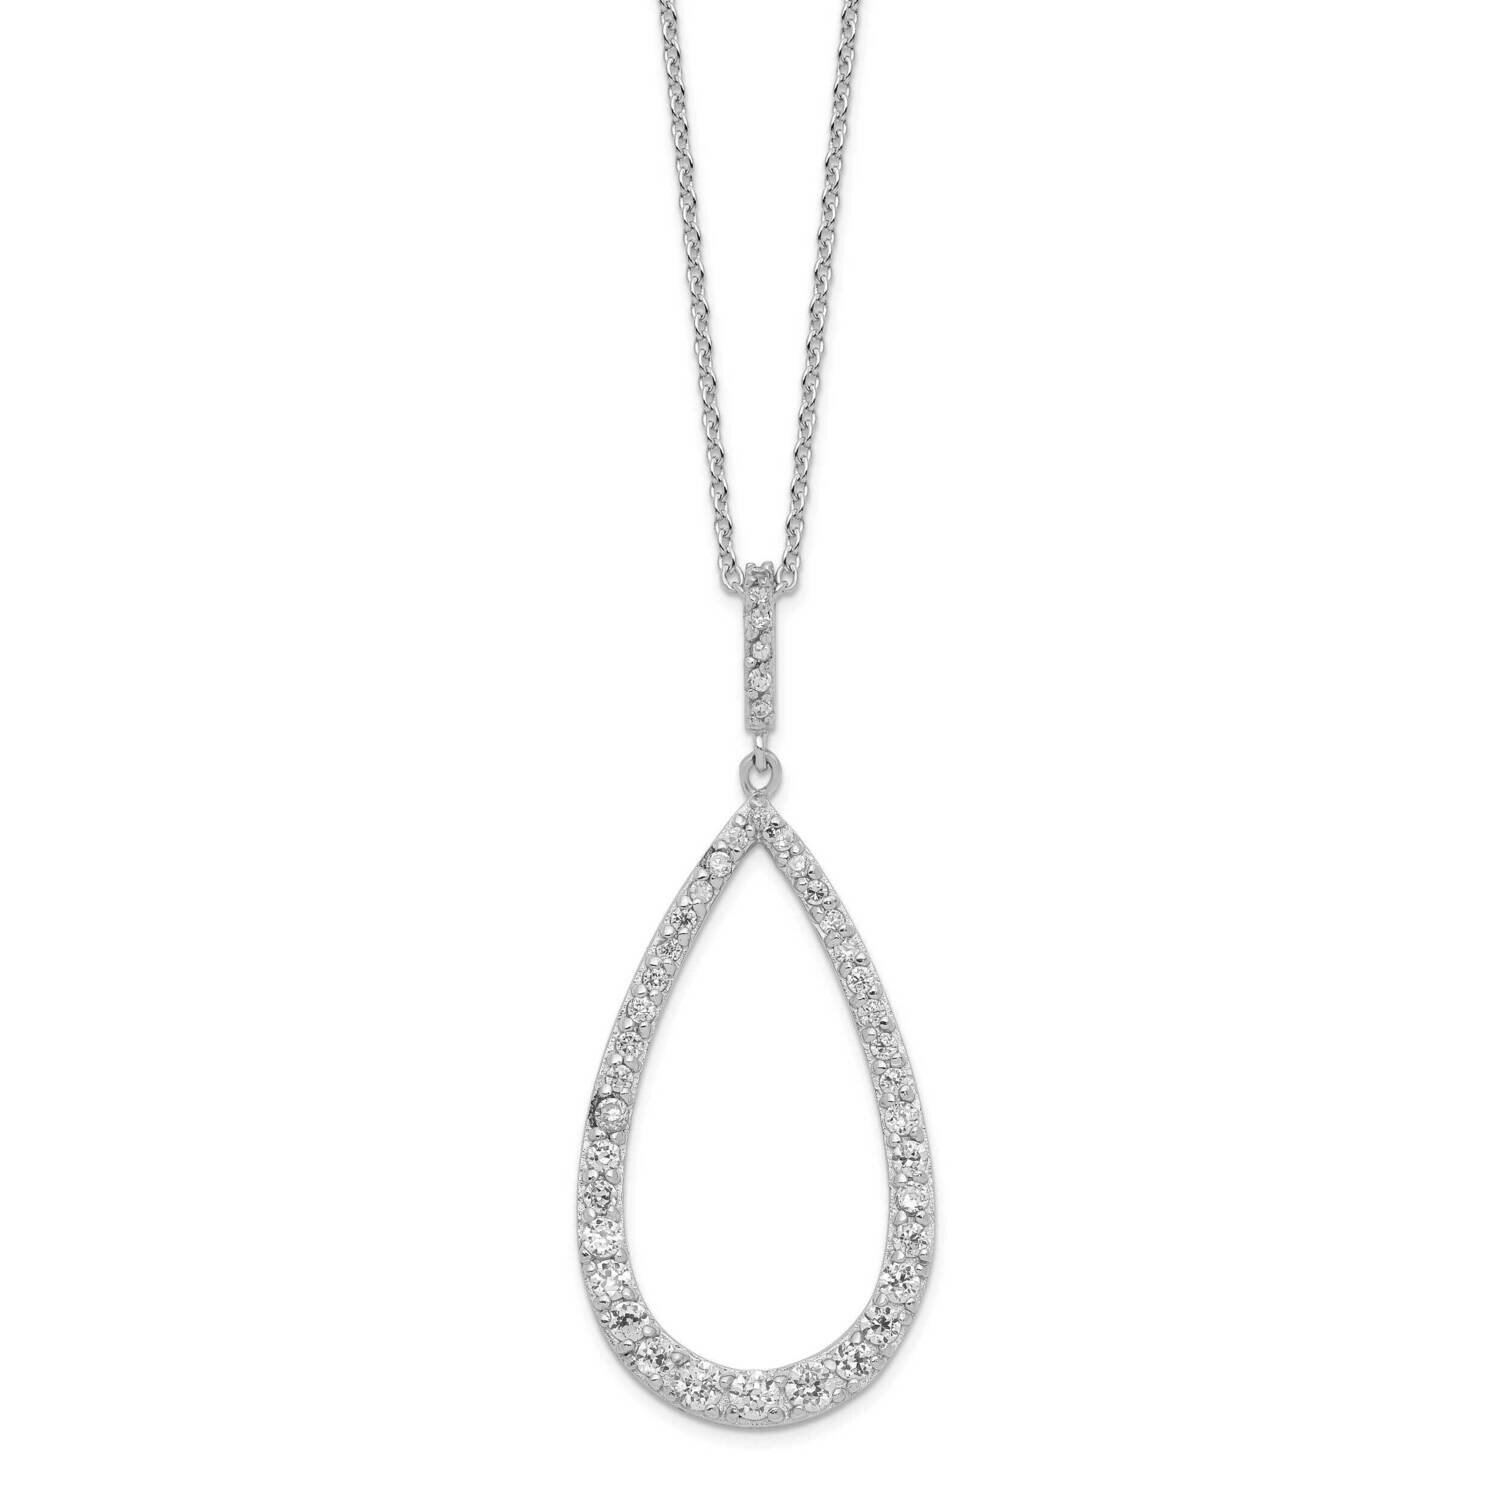 Cheryl M CZ Diamond Open Pear Pendant 18 Inch Necklace Sterling Silver Rhodium-plated QCM1506-18